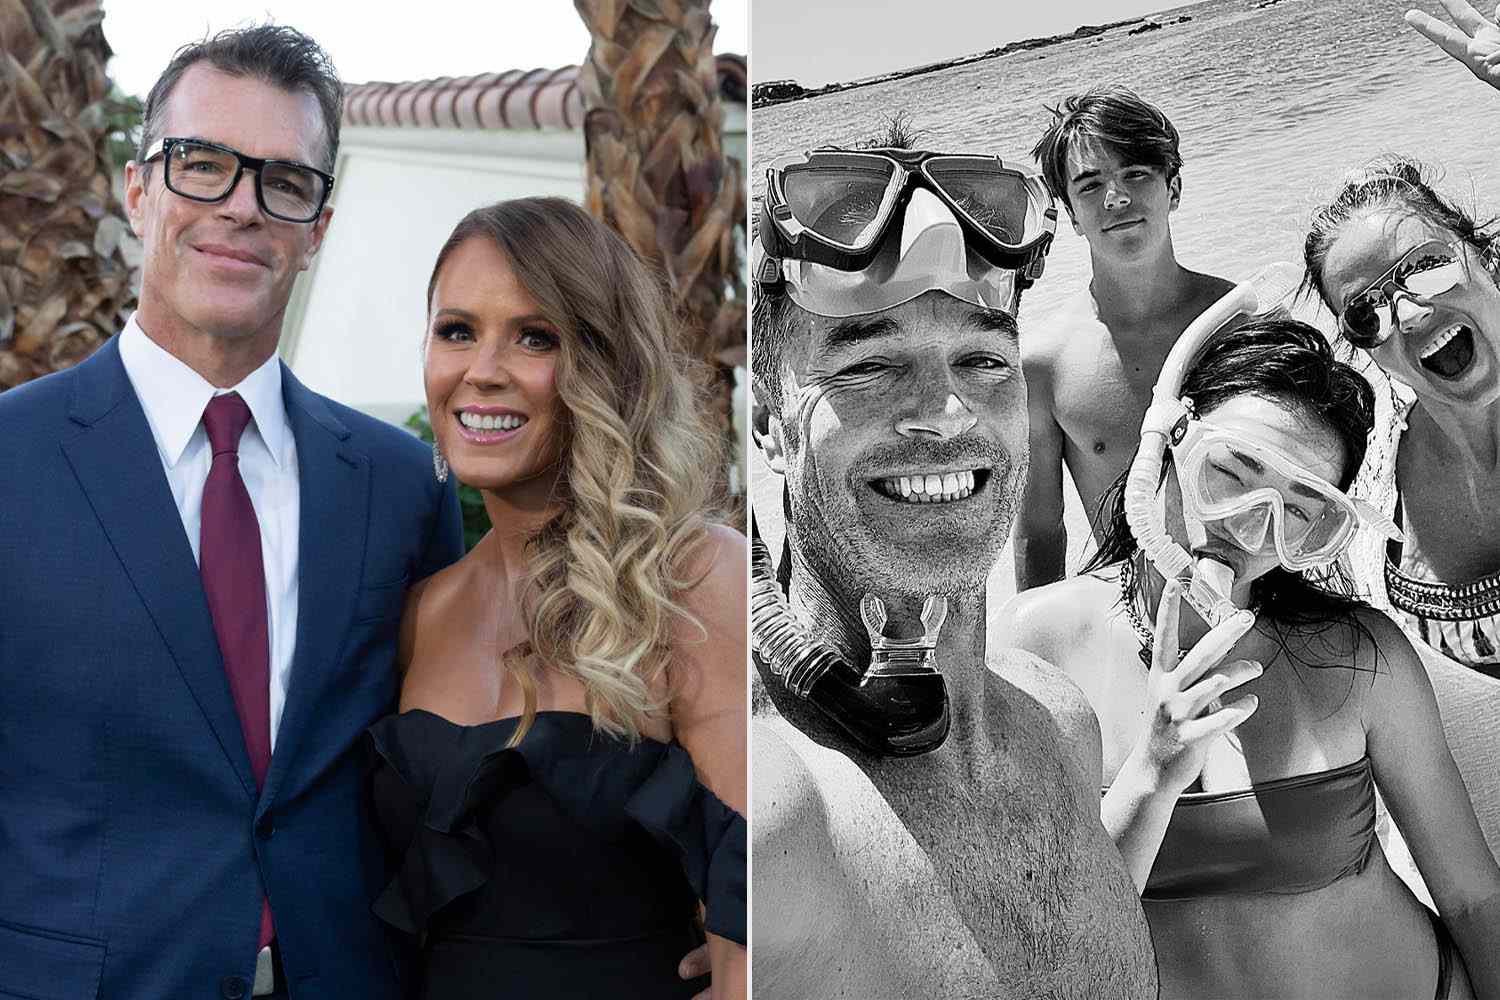 Trista Sutter Returns After Personal Growth Journey Amid Fan Concerns